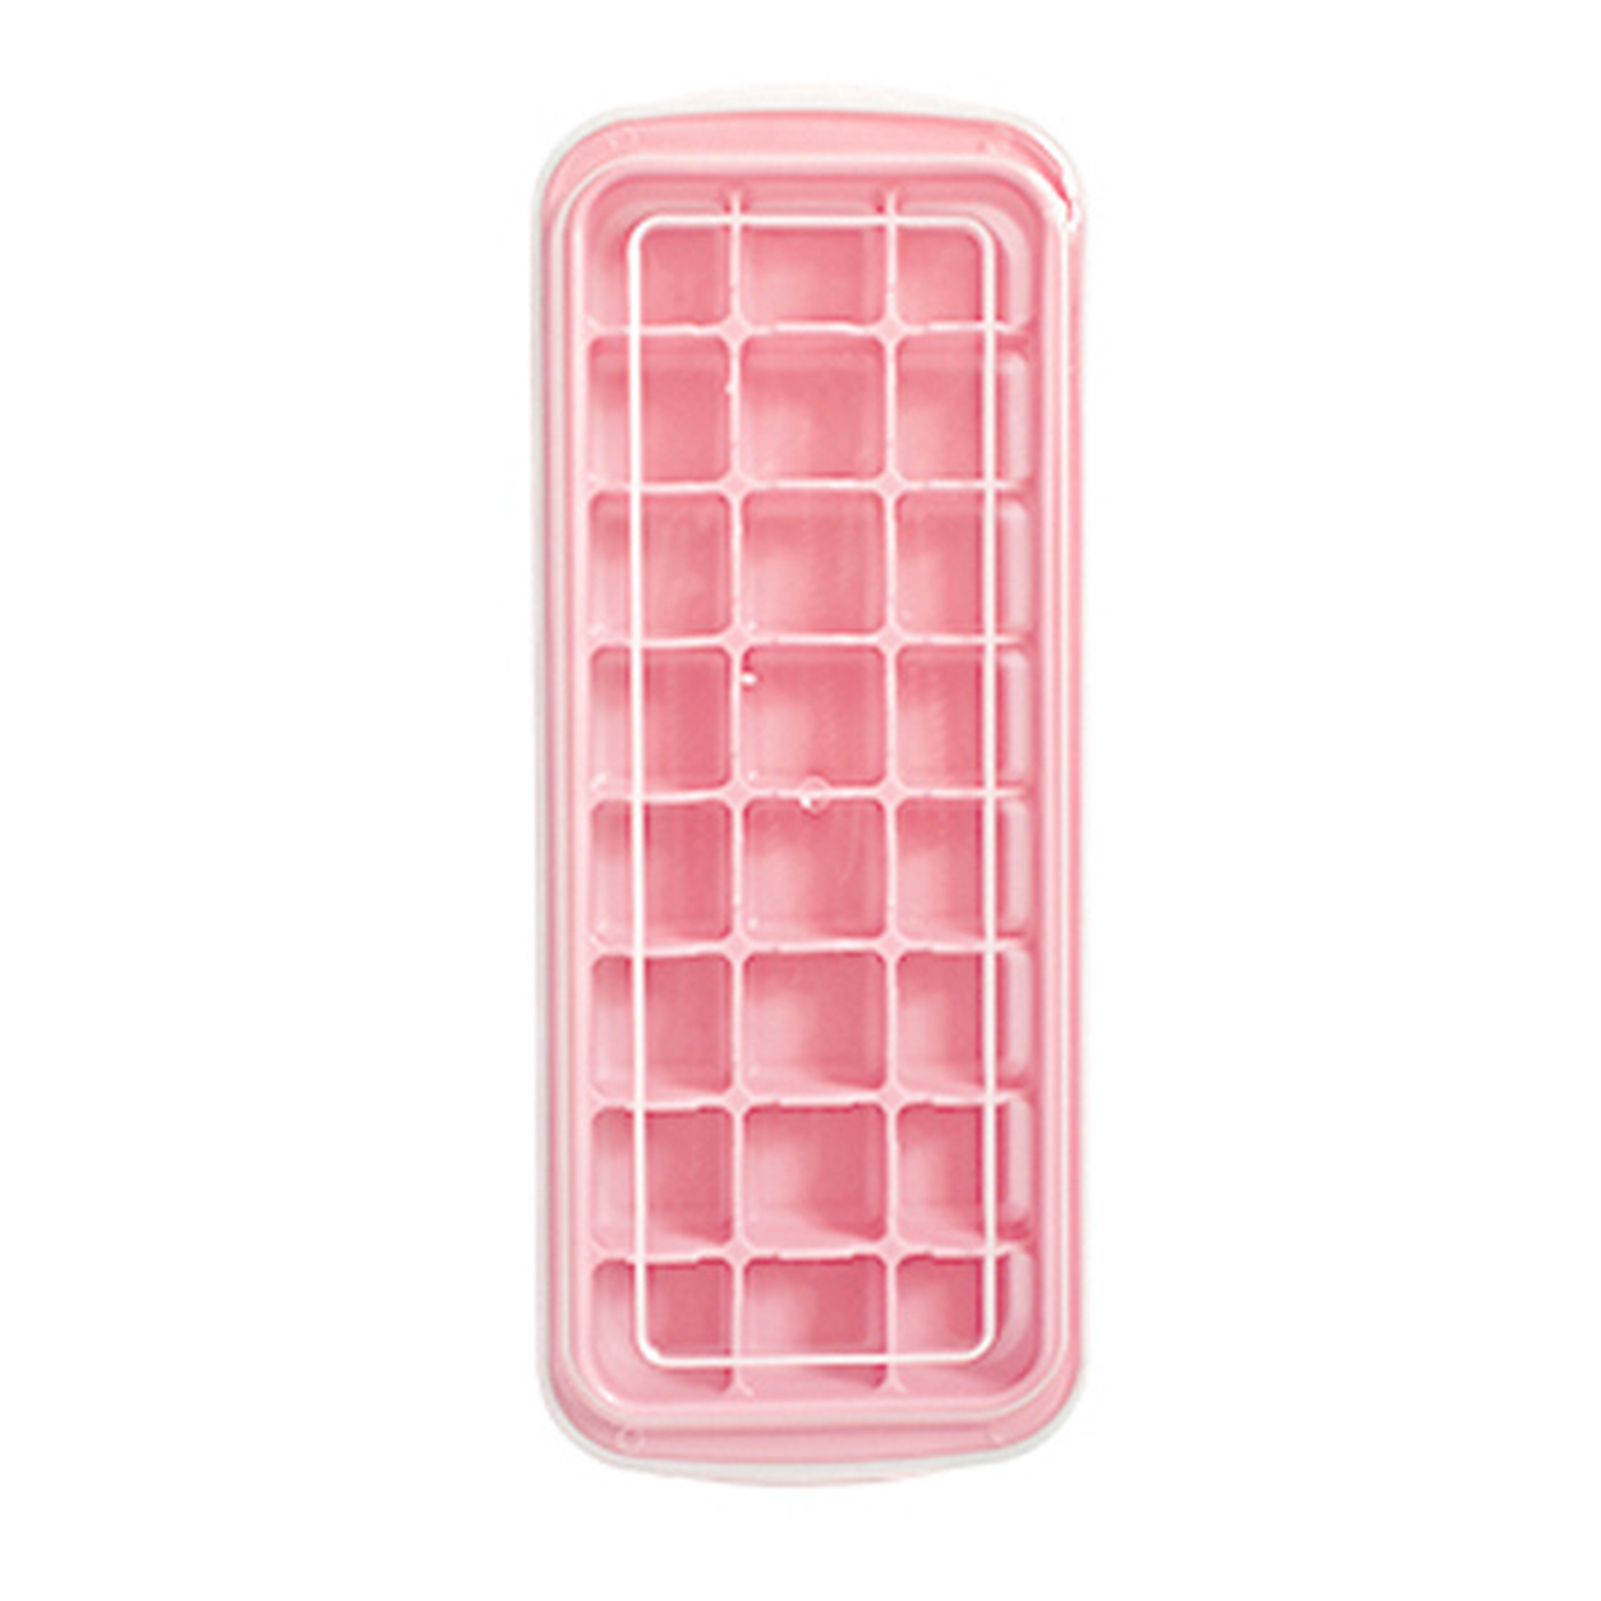 Ice Cube Trays,Ice Tray Food Grade Flexible Silicone Ice Cube Tray Molds with Lids, Easy Release Ice Trays Make 24/36 Ice Cube, Stackable Dishwasher Safe - image 1 of 8